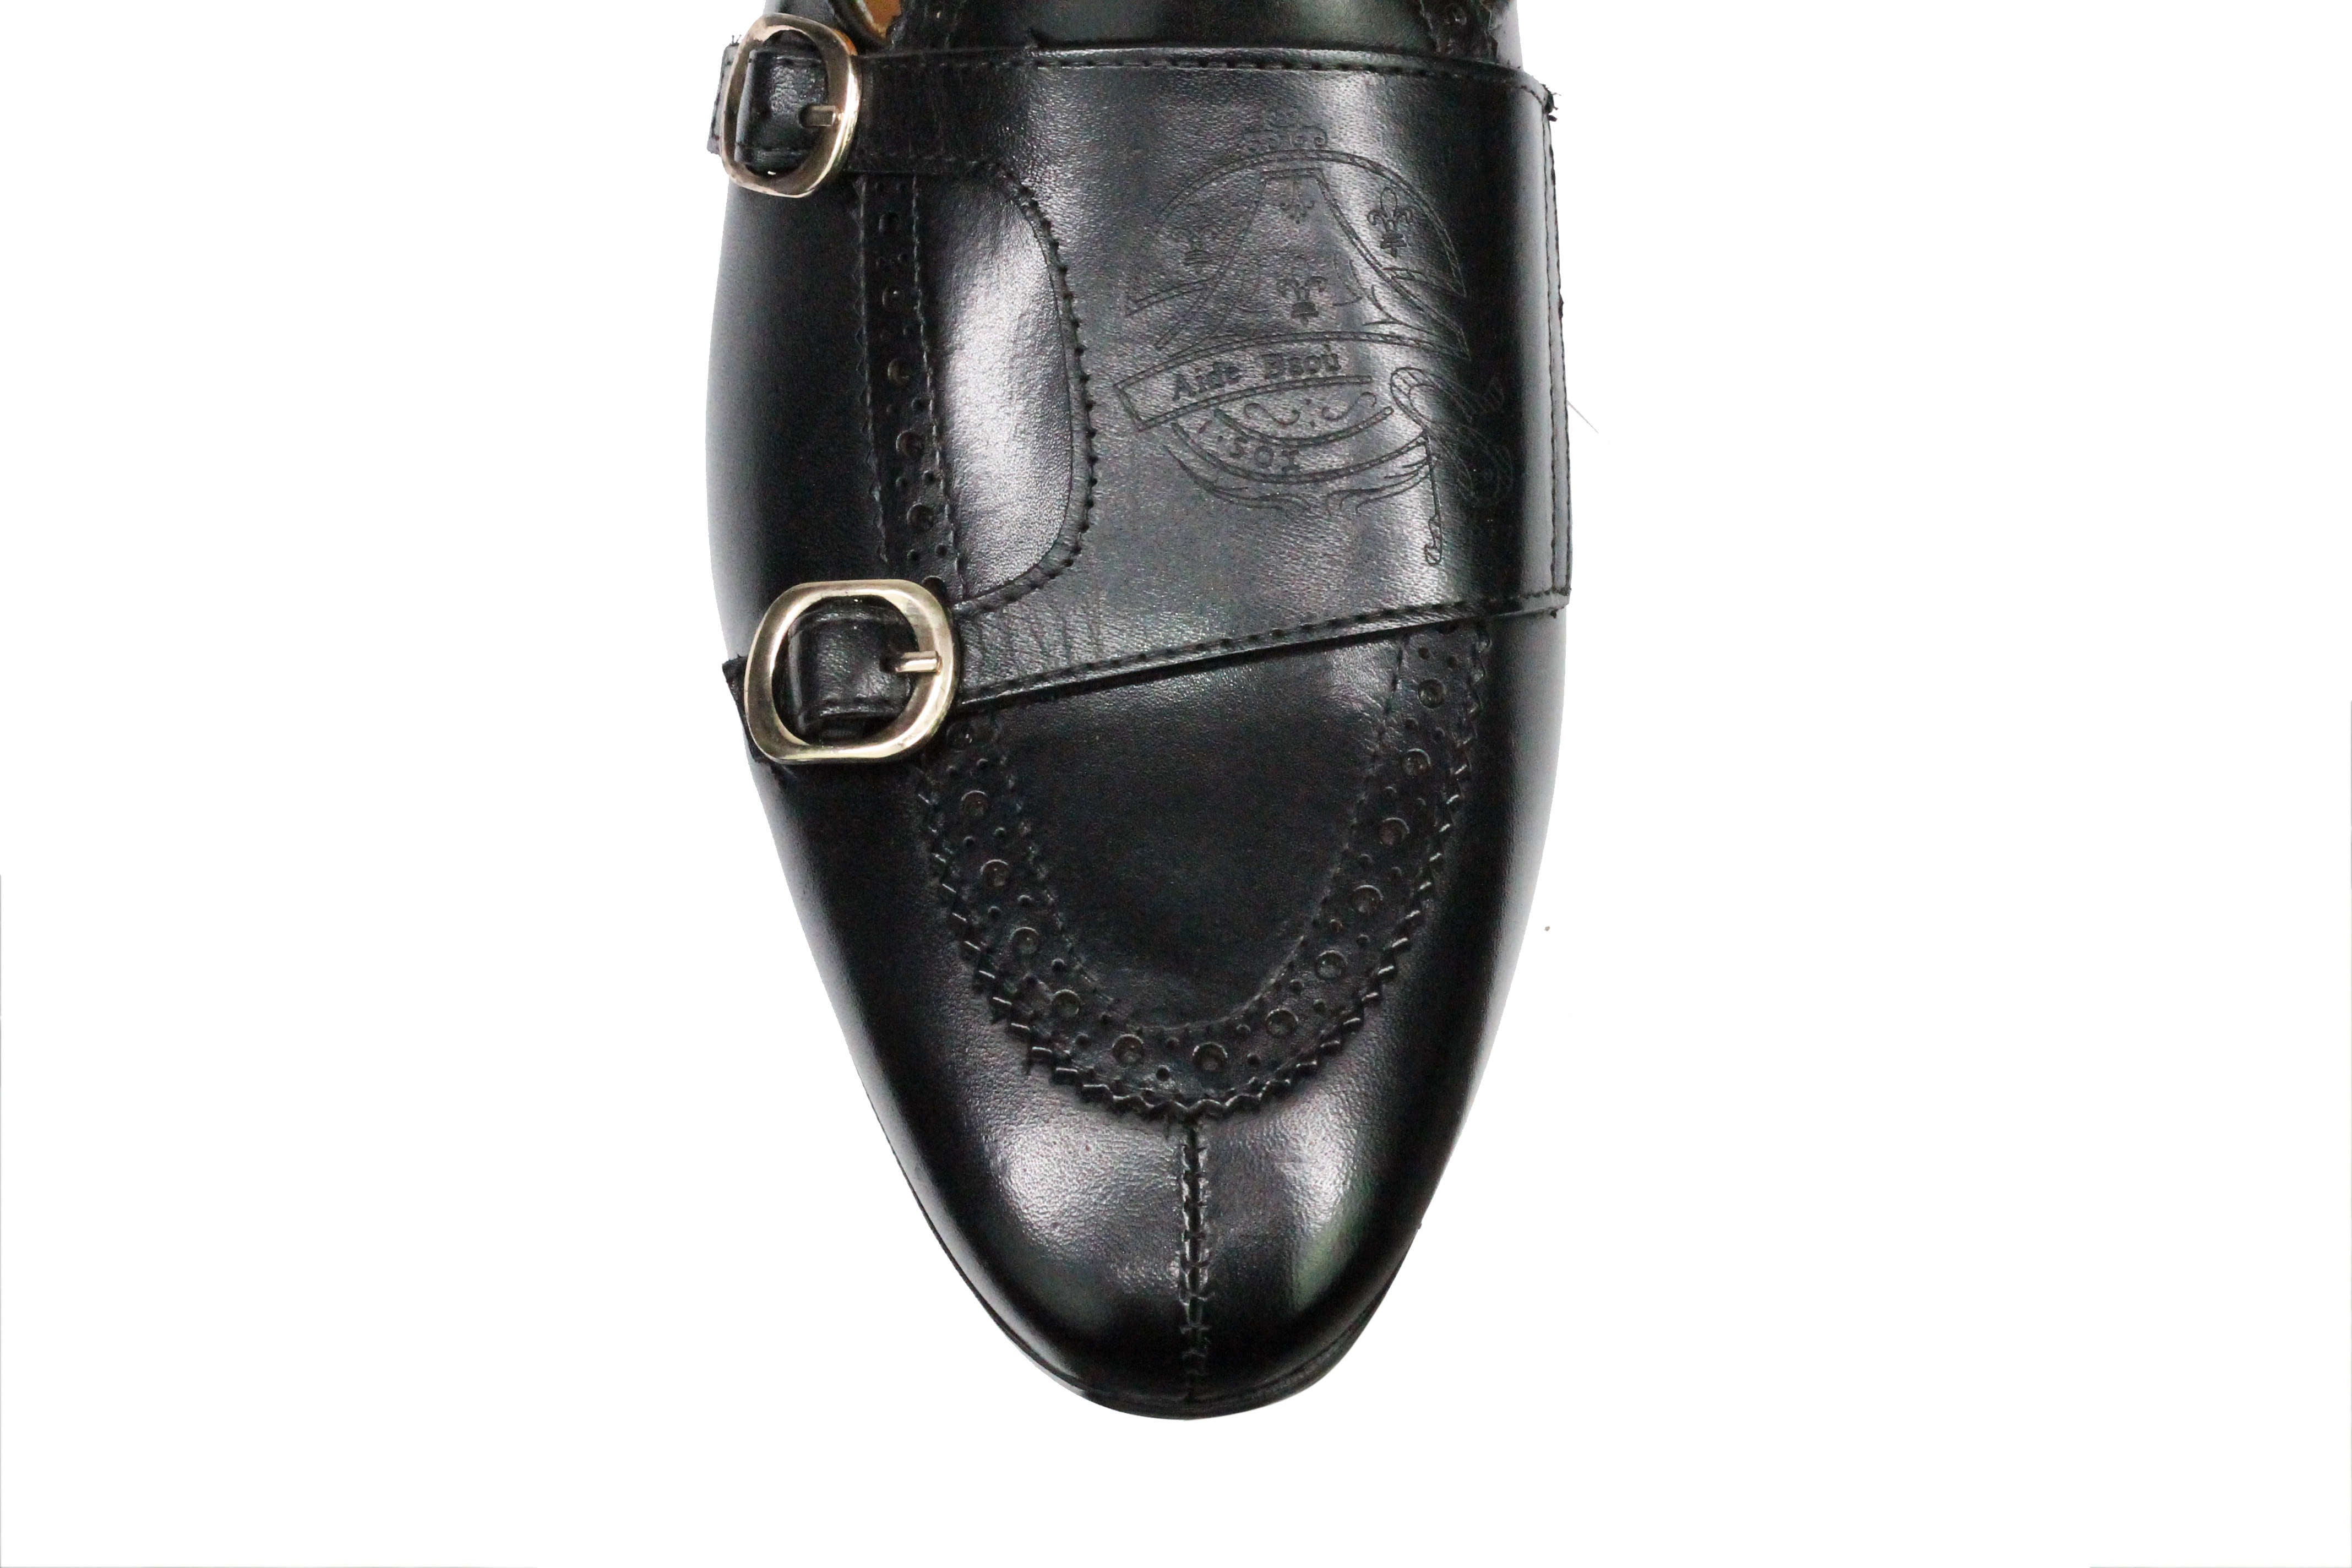 Real Leather Double Monk Shoes Black